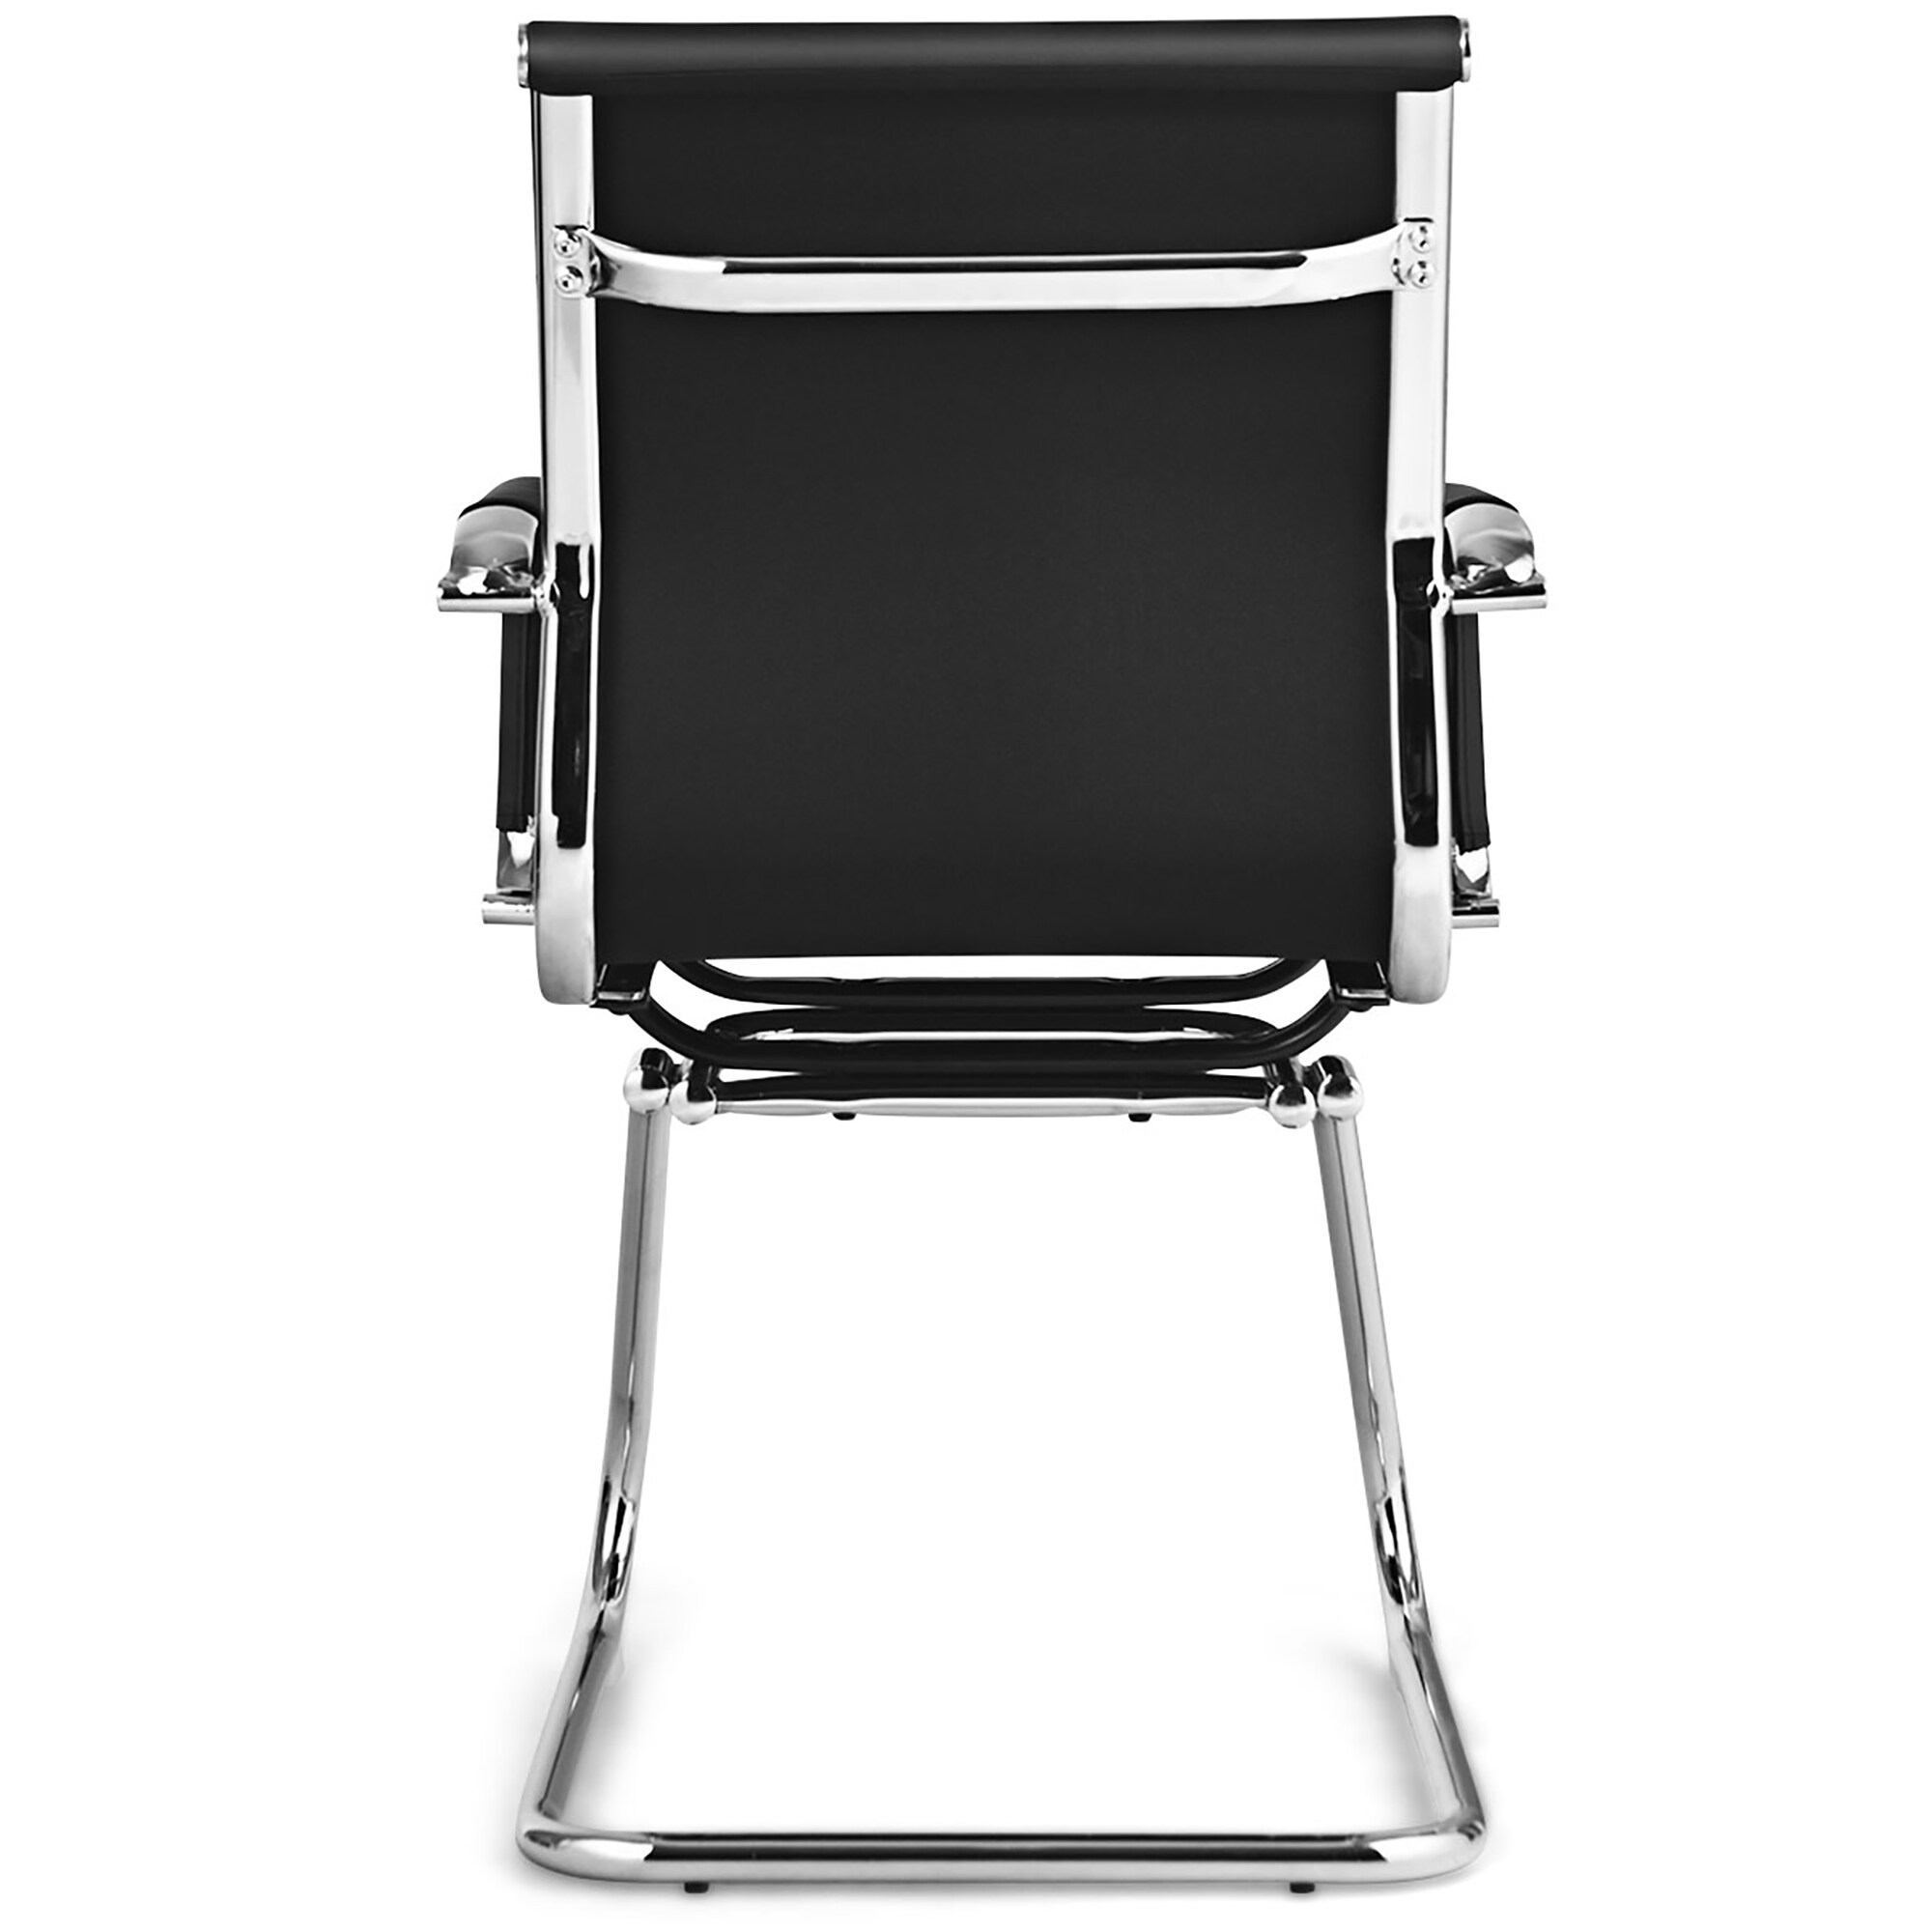 Black Metal PU Leather Cushion Folding Chair Office Chair (Set of 4)